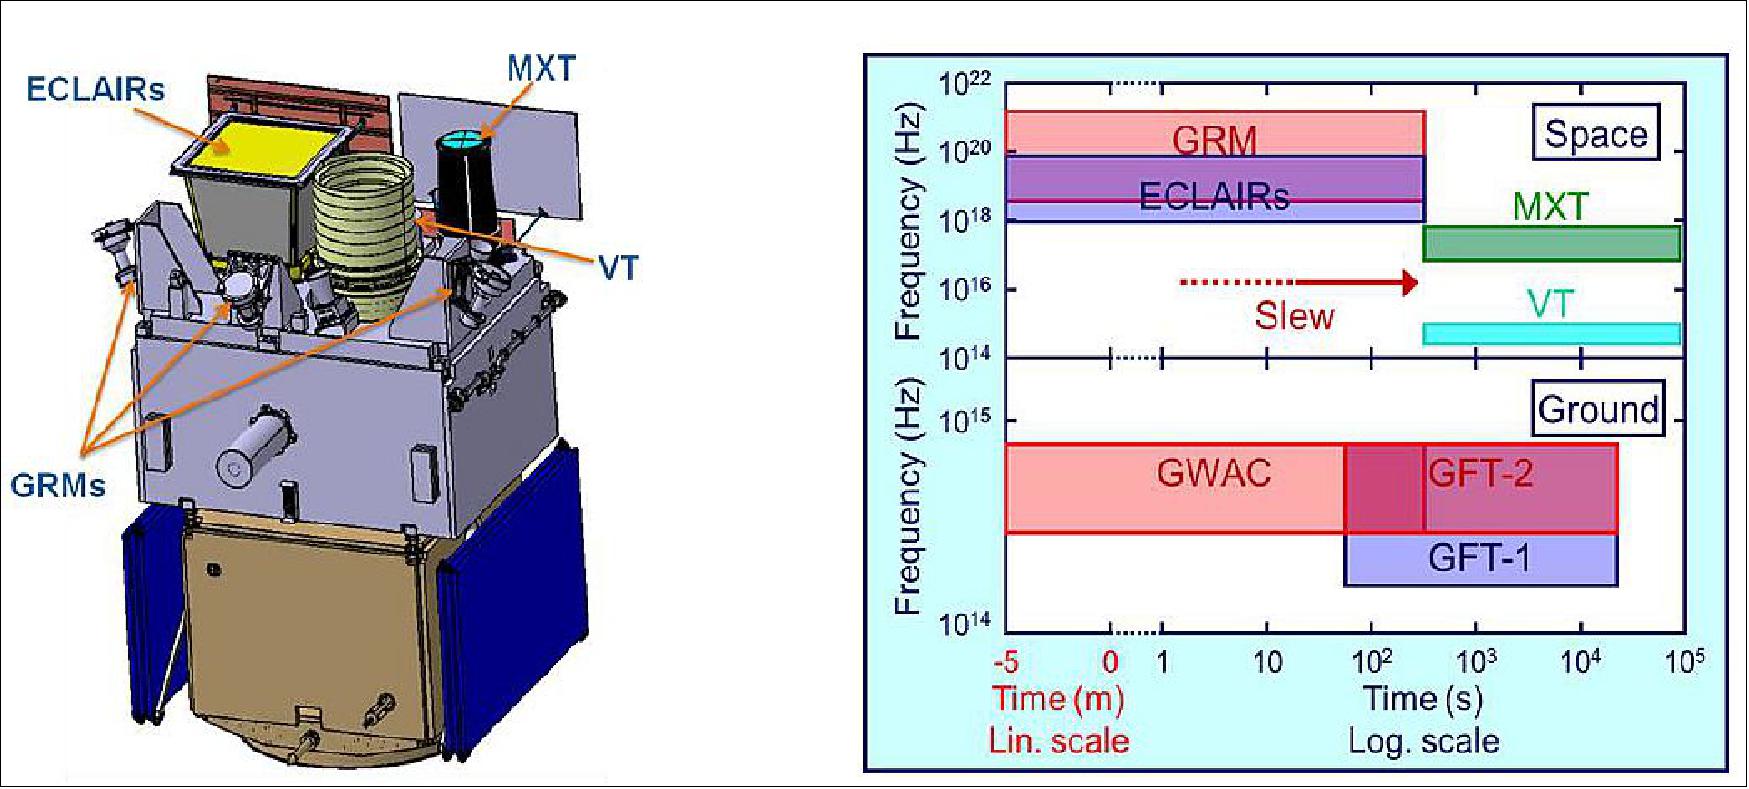 Figure 4: Schematic showing the SVOM spacecraft with its multi-wavelength space payload. It consists of two wide-field instruments: ECLAIRs & the GRM (Gamma-Ray Monitor) for the observation of the prompt emission and two narrow field instruments: the MXT (Micro channel X-ray Telescope) and the VT (Visible Telescope) for the observation of the afterglow emission. Right: Space and ground instruments join to enable a unique coverage in time and wavelength (image credit: SVOM collaboration, Ref. 2)